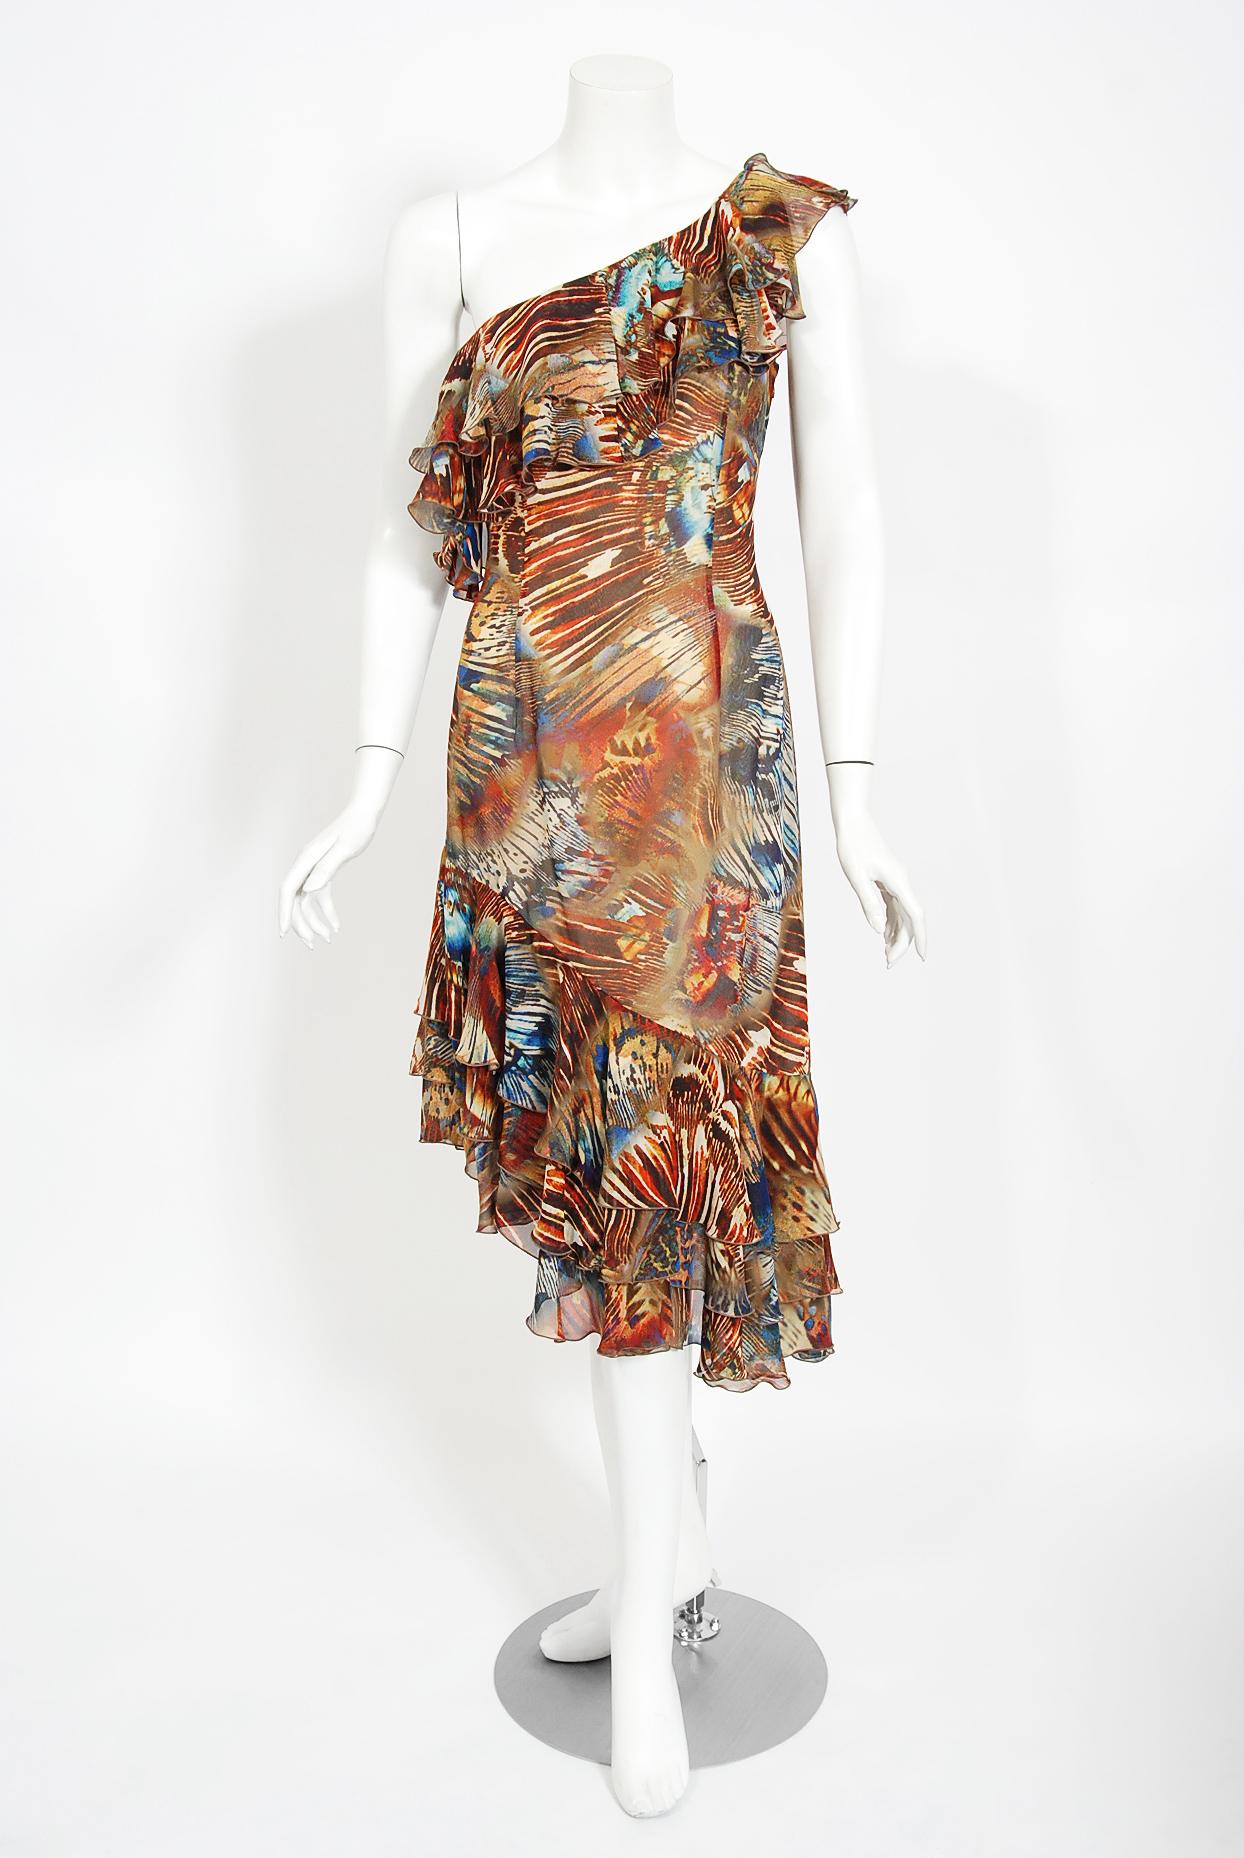 This sensational butterfly-wings insect novelty print silk dress from his 1997 spring-summer couture collection is a perfect example of Thierry Mugler's genius. He is known for bold fashion and edgy, sometimes even campy, theatricality. In the